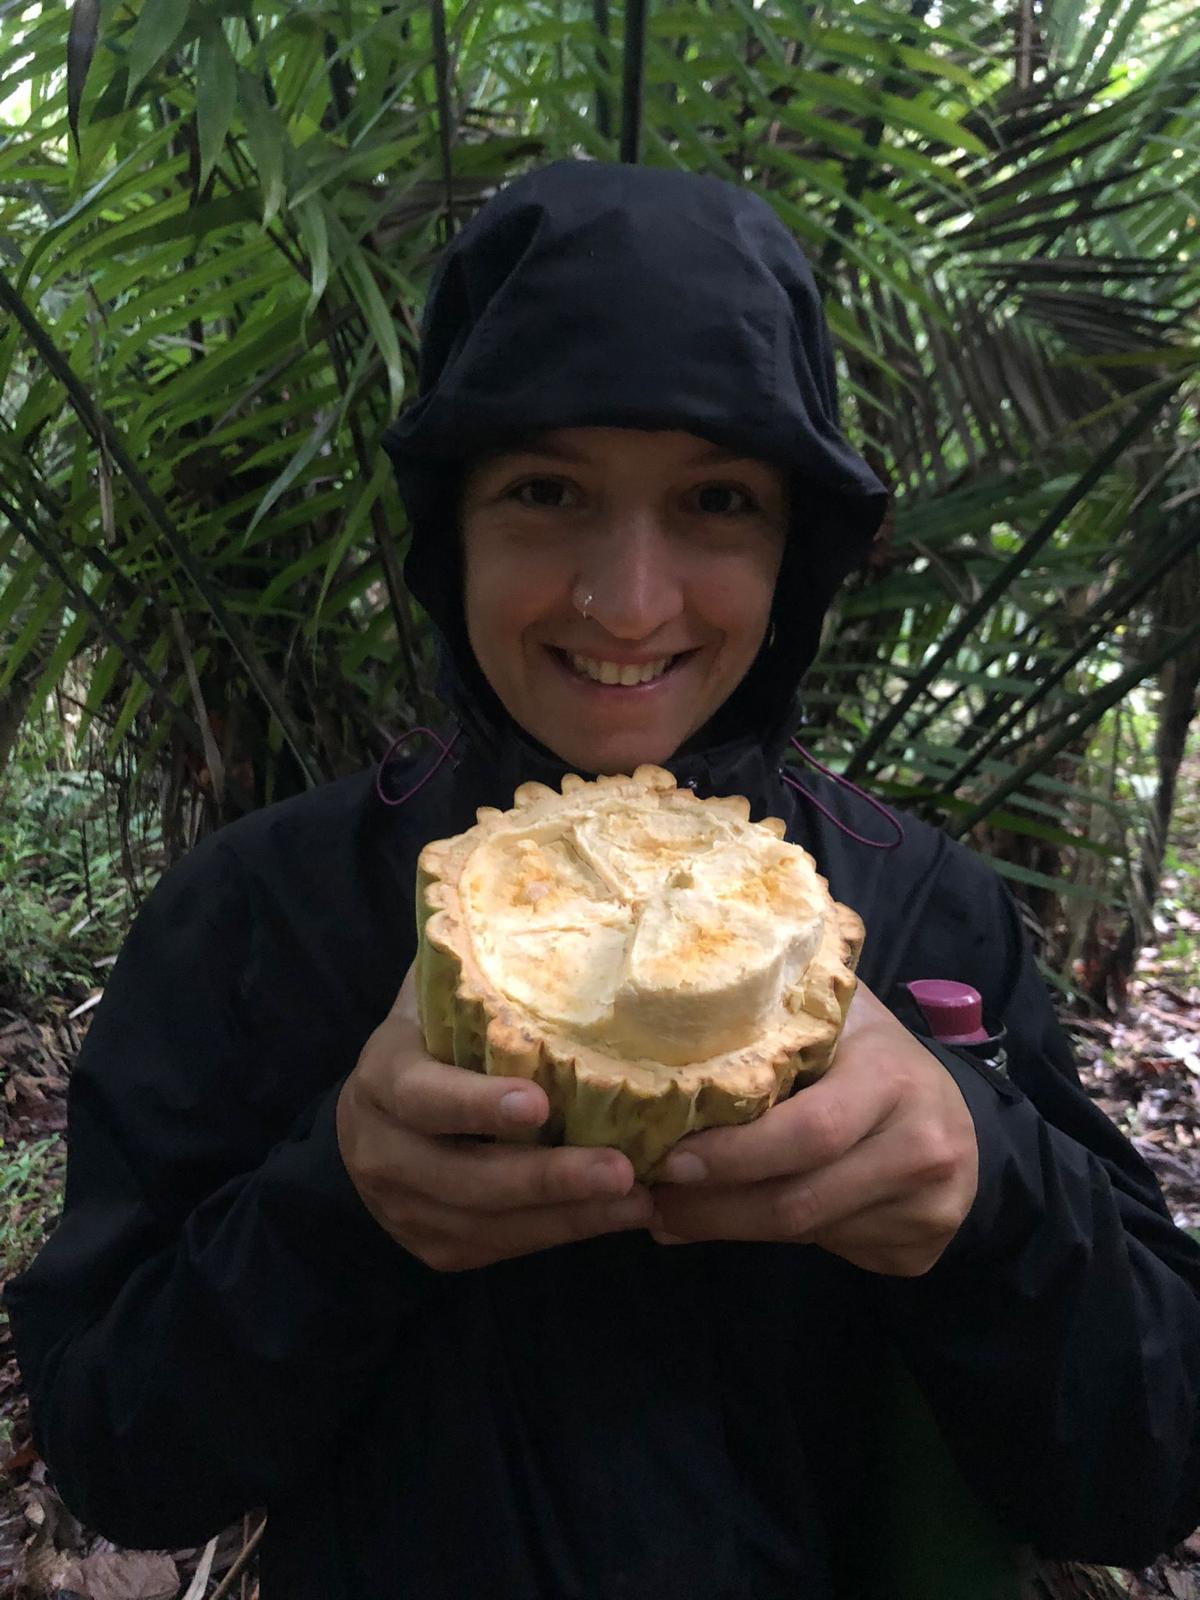 Survival skills tour - forage for food in the jungle